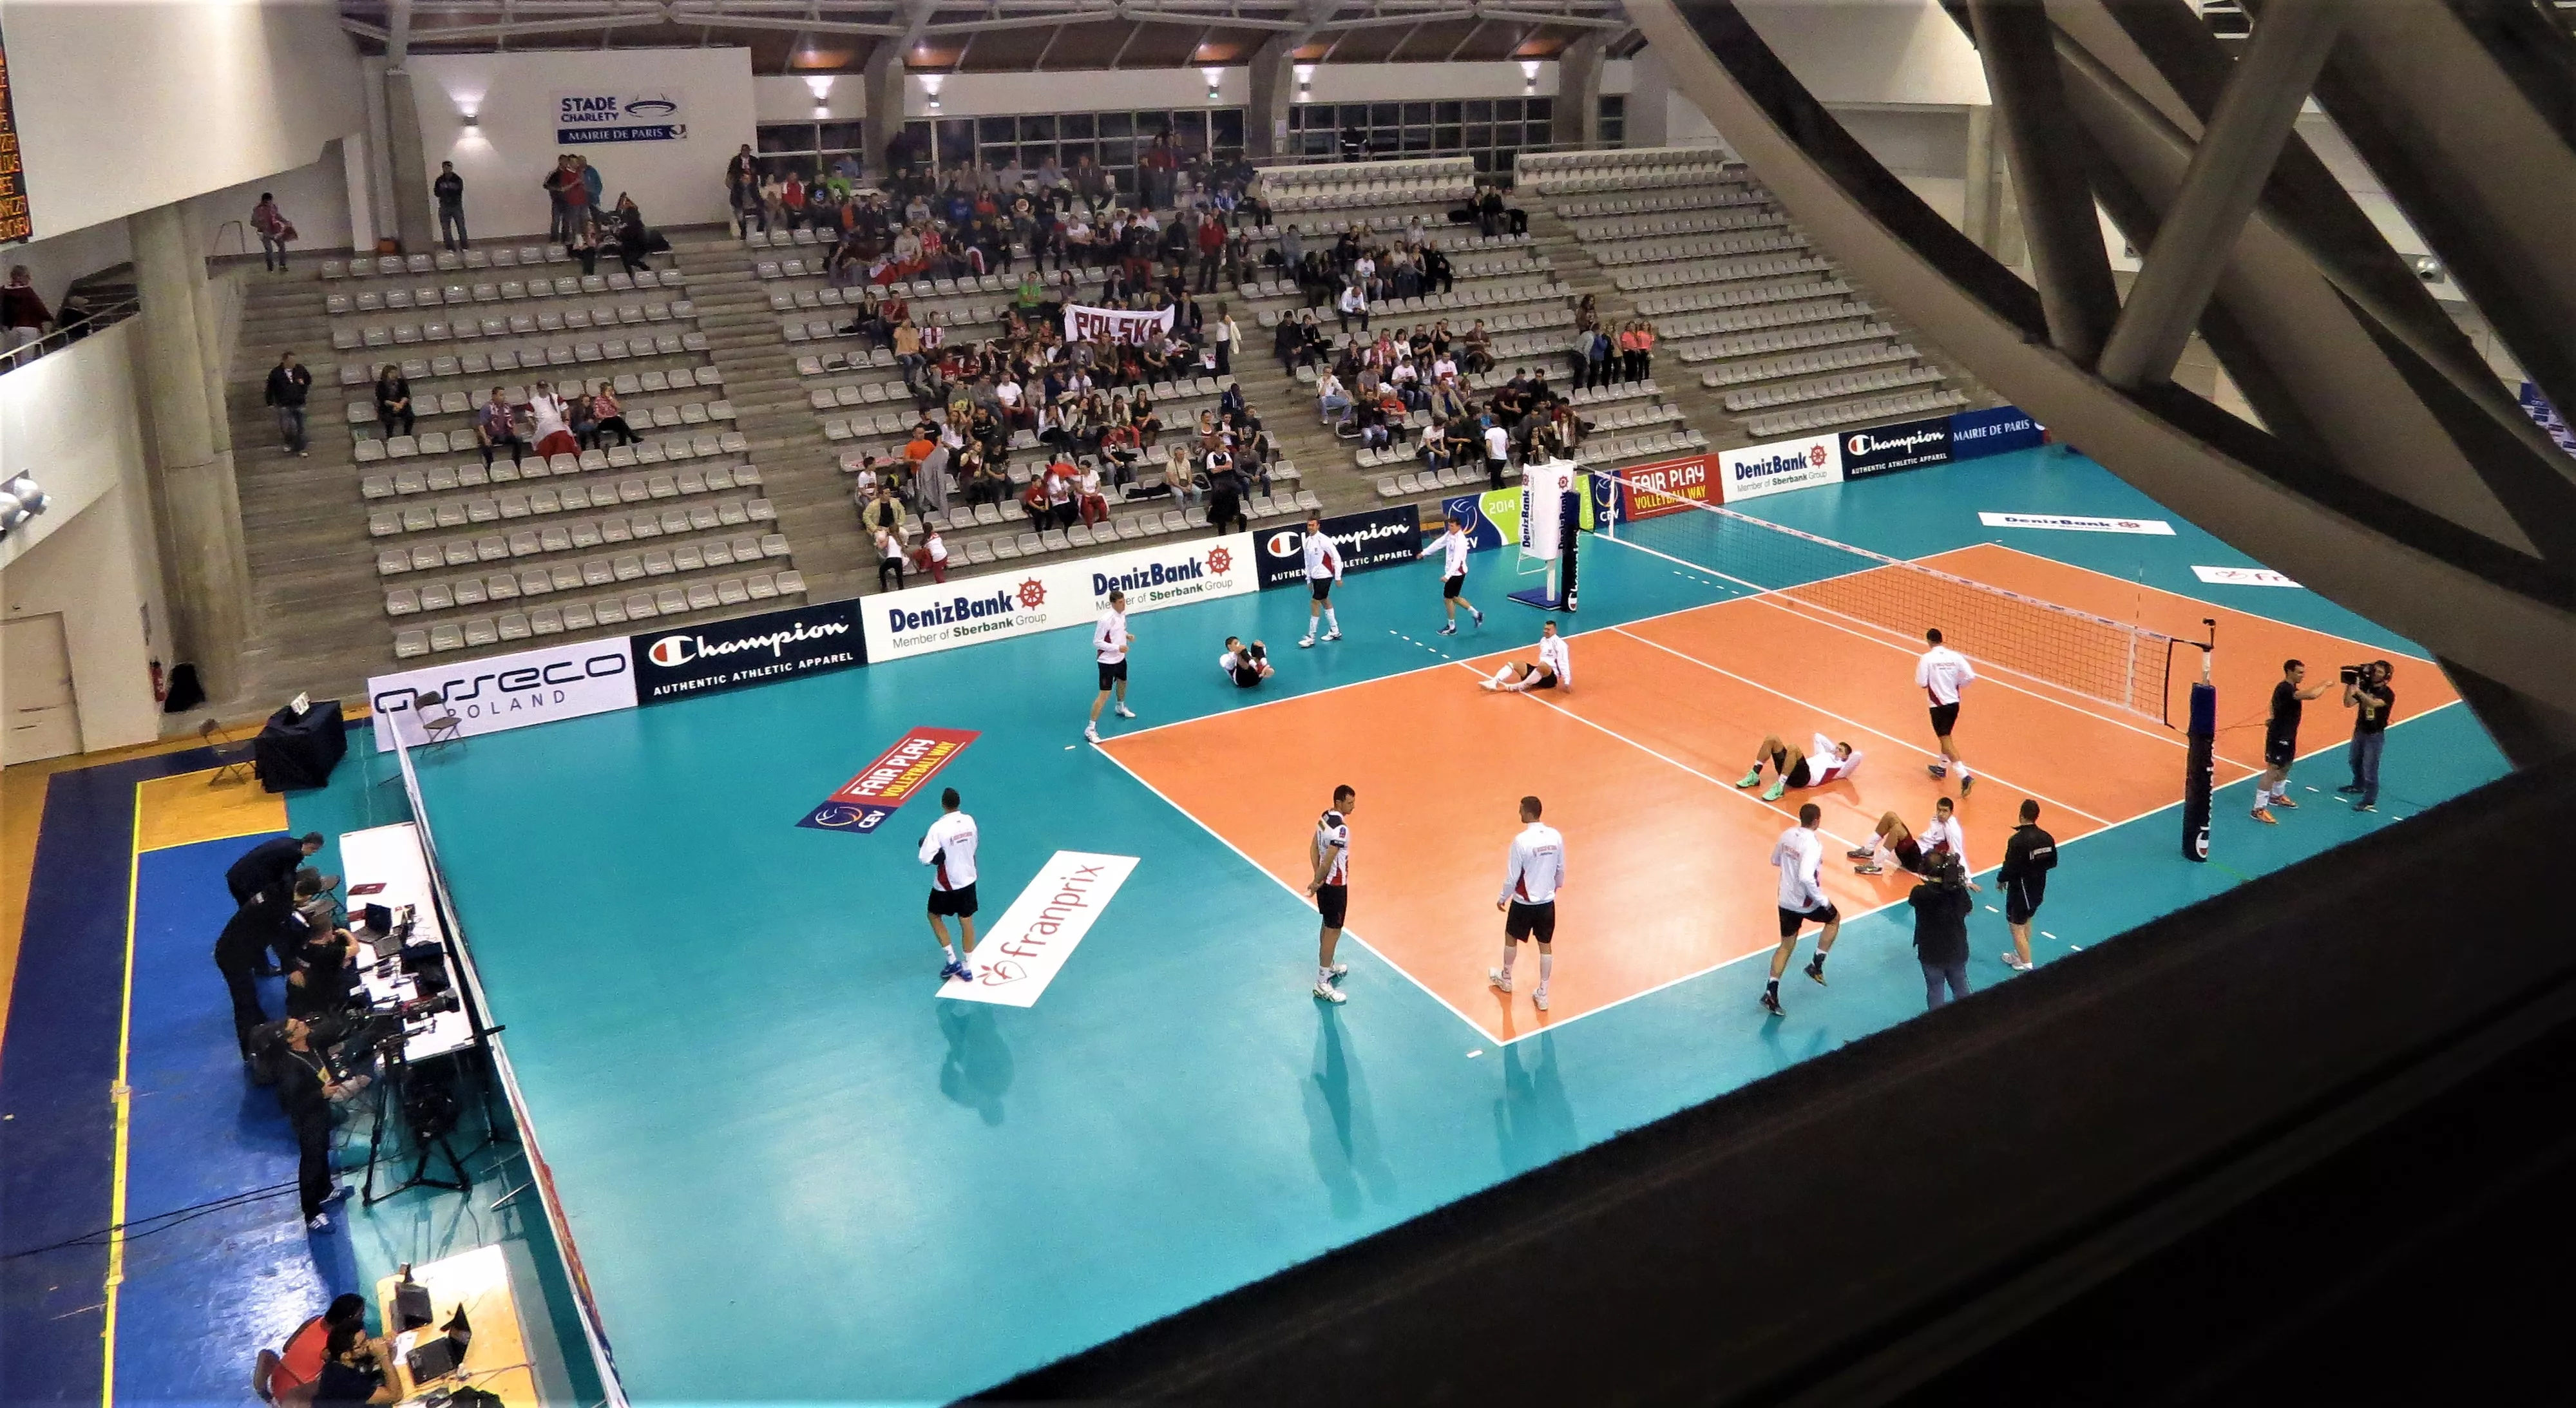 Salle Pierre Charpy in France, Europe | Volleyball - Rated 0.8